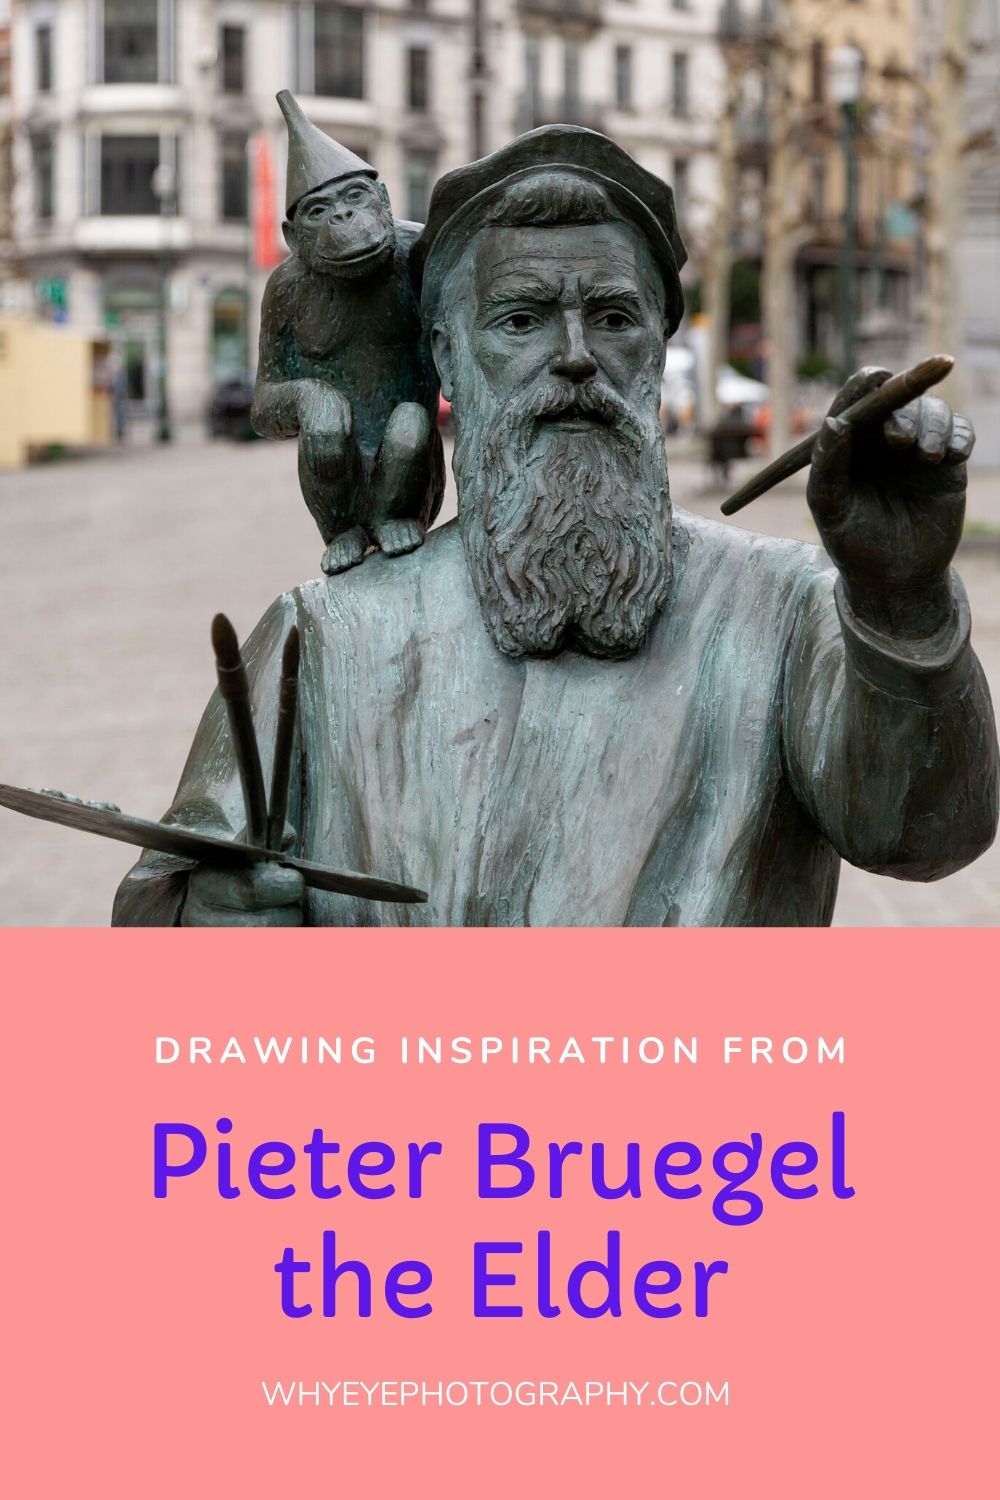 Pinterest pin for the whyeyephotography.com blog post about drawing inspiration from Pieter Bruegel the Elder in Brussels, Belgium